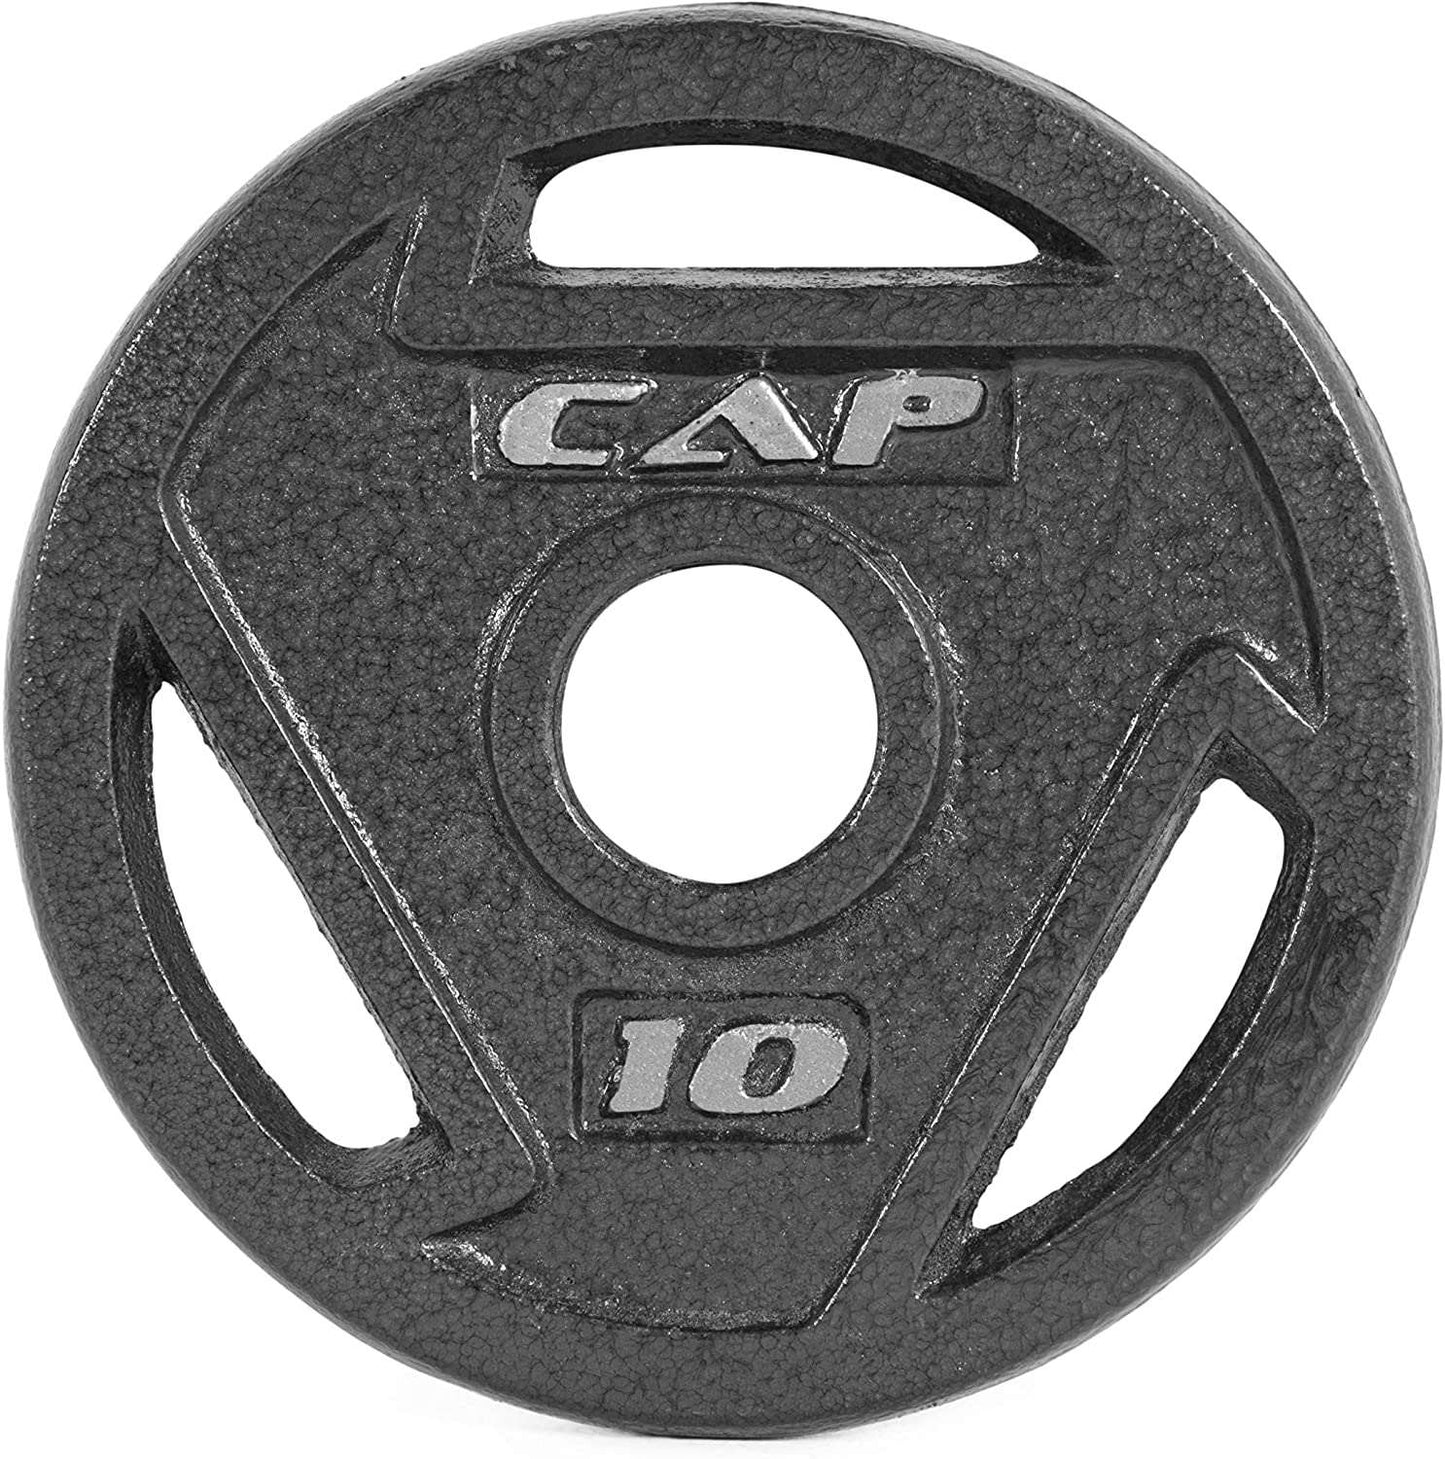 Olympic Grip Weight Plate Collection